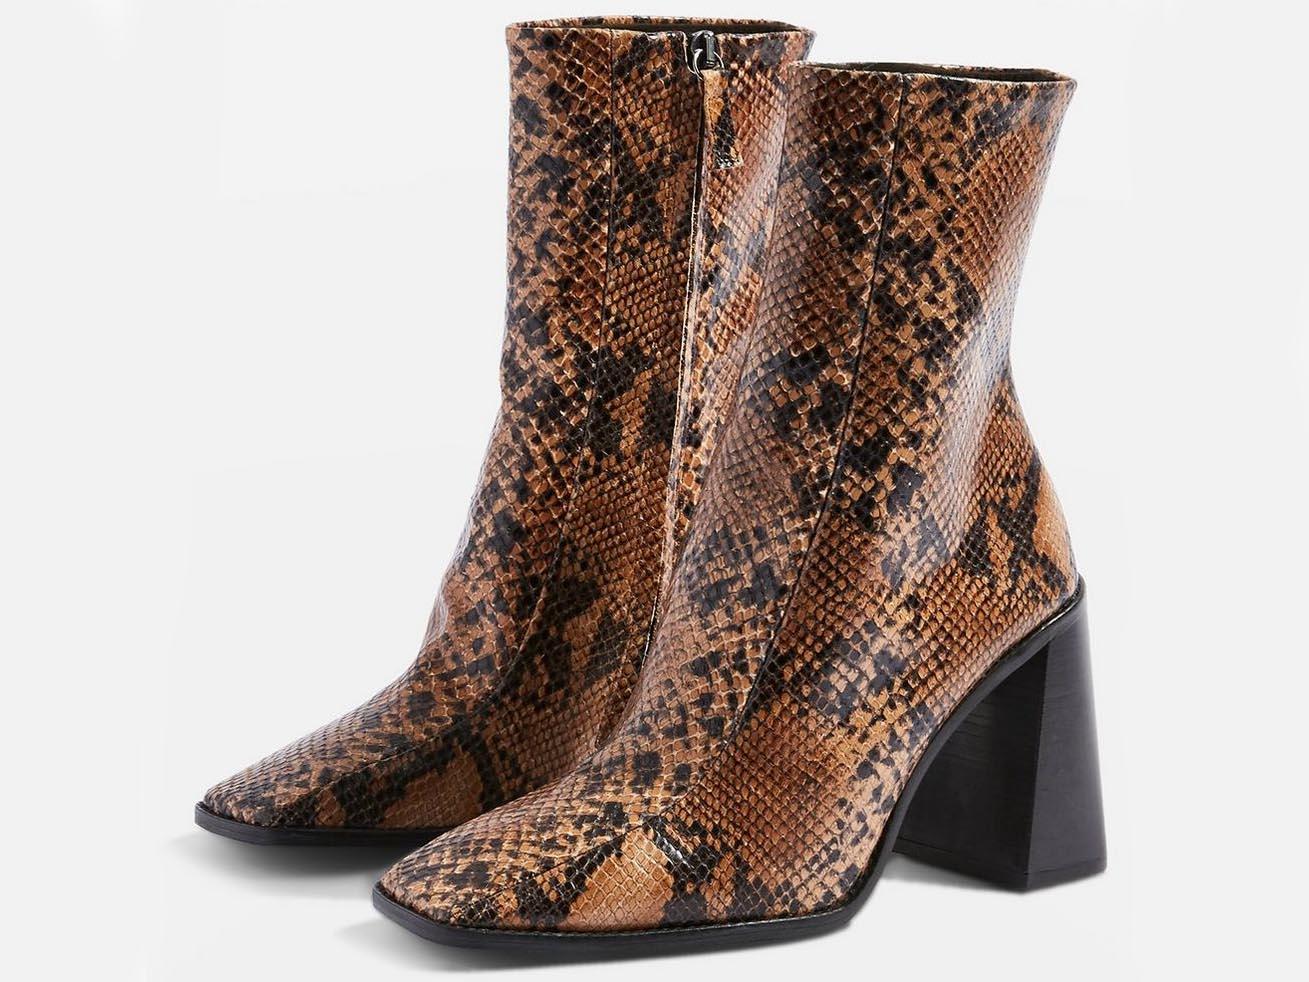 Hurricane High Ankle Boots, £89, Topshop